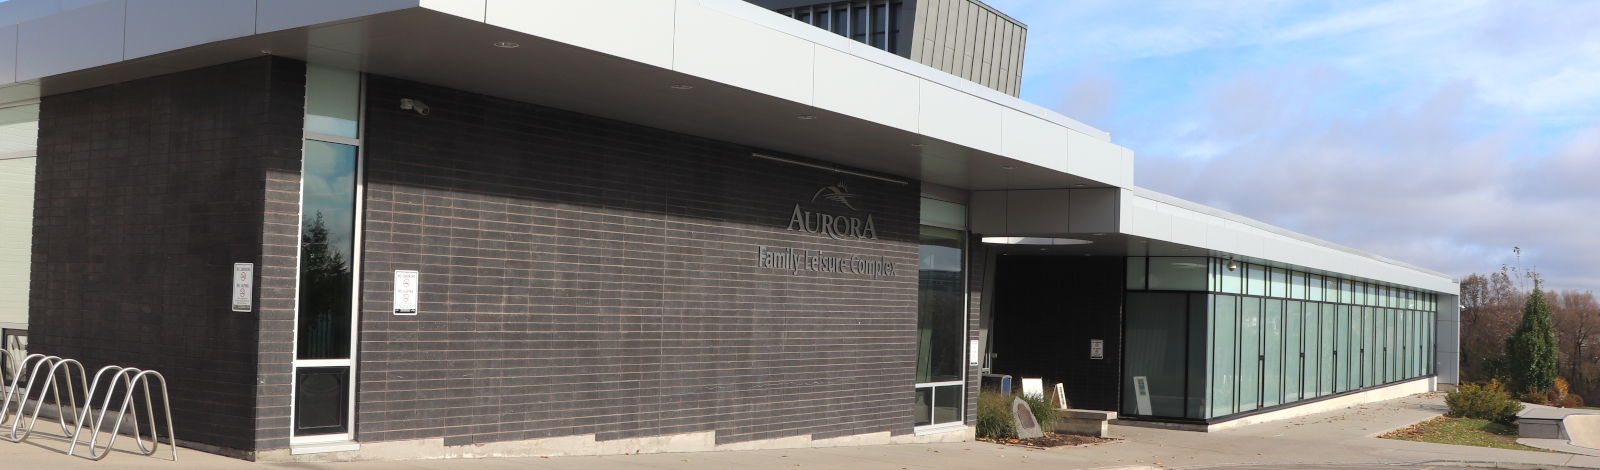 Front of building Aurora Family Leisure Complex